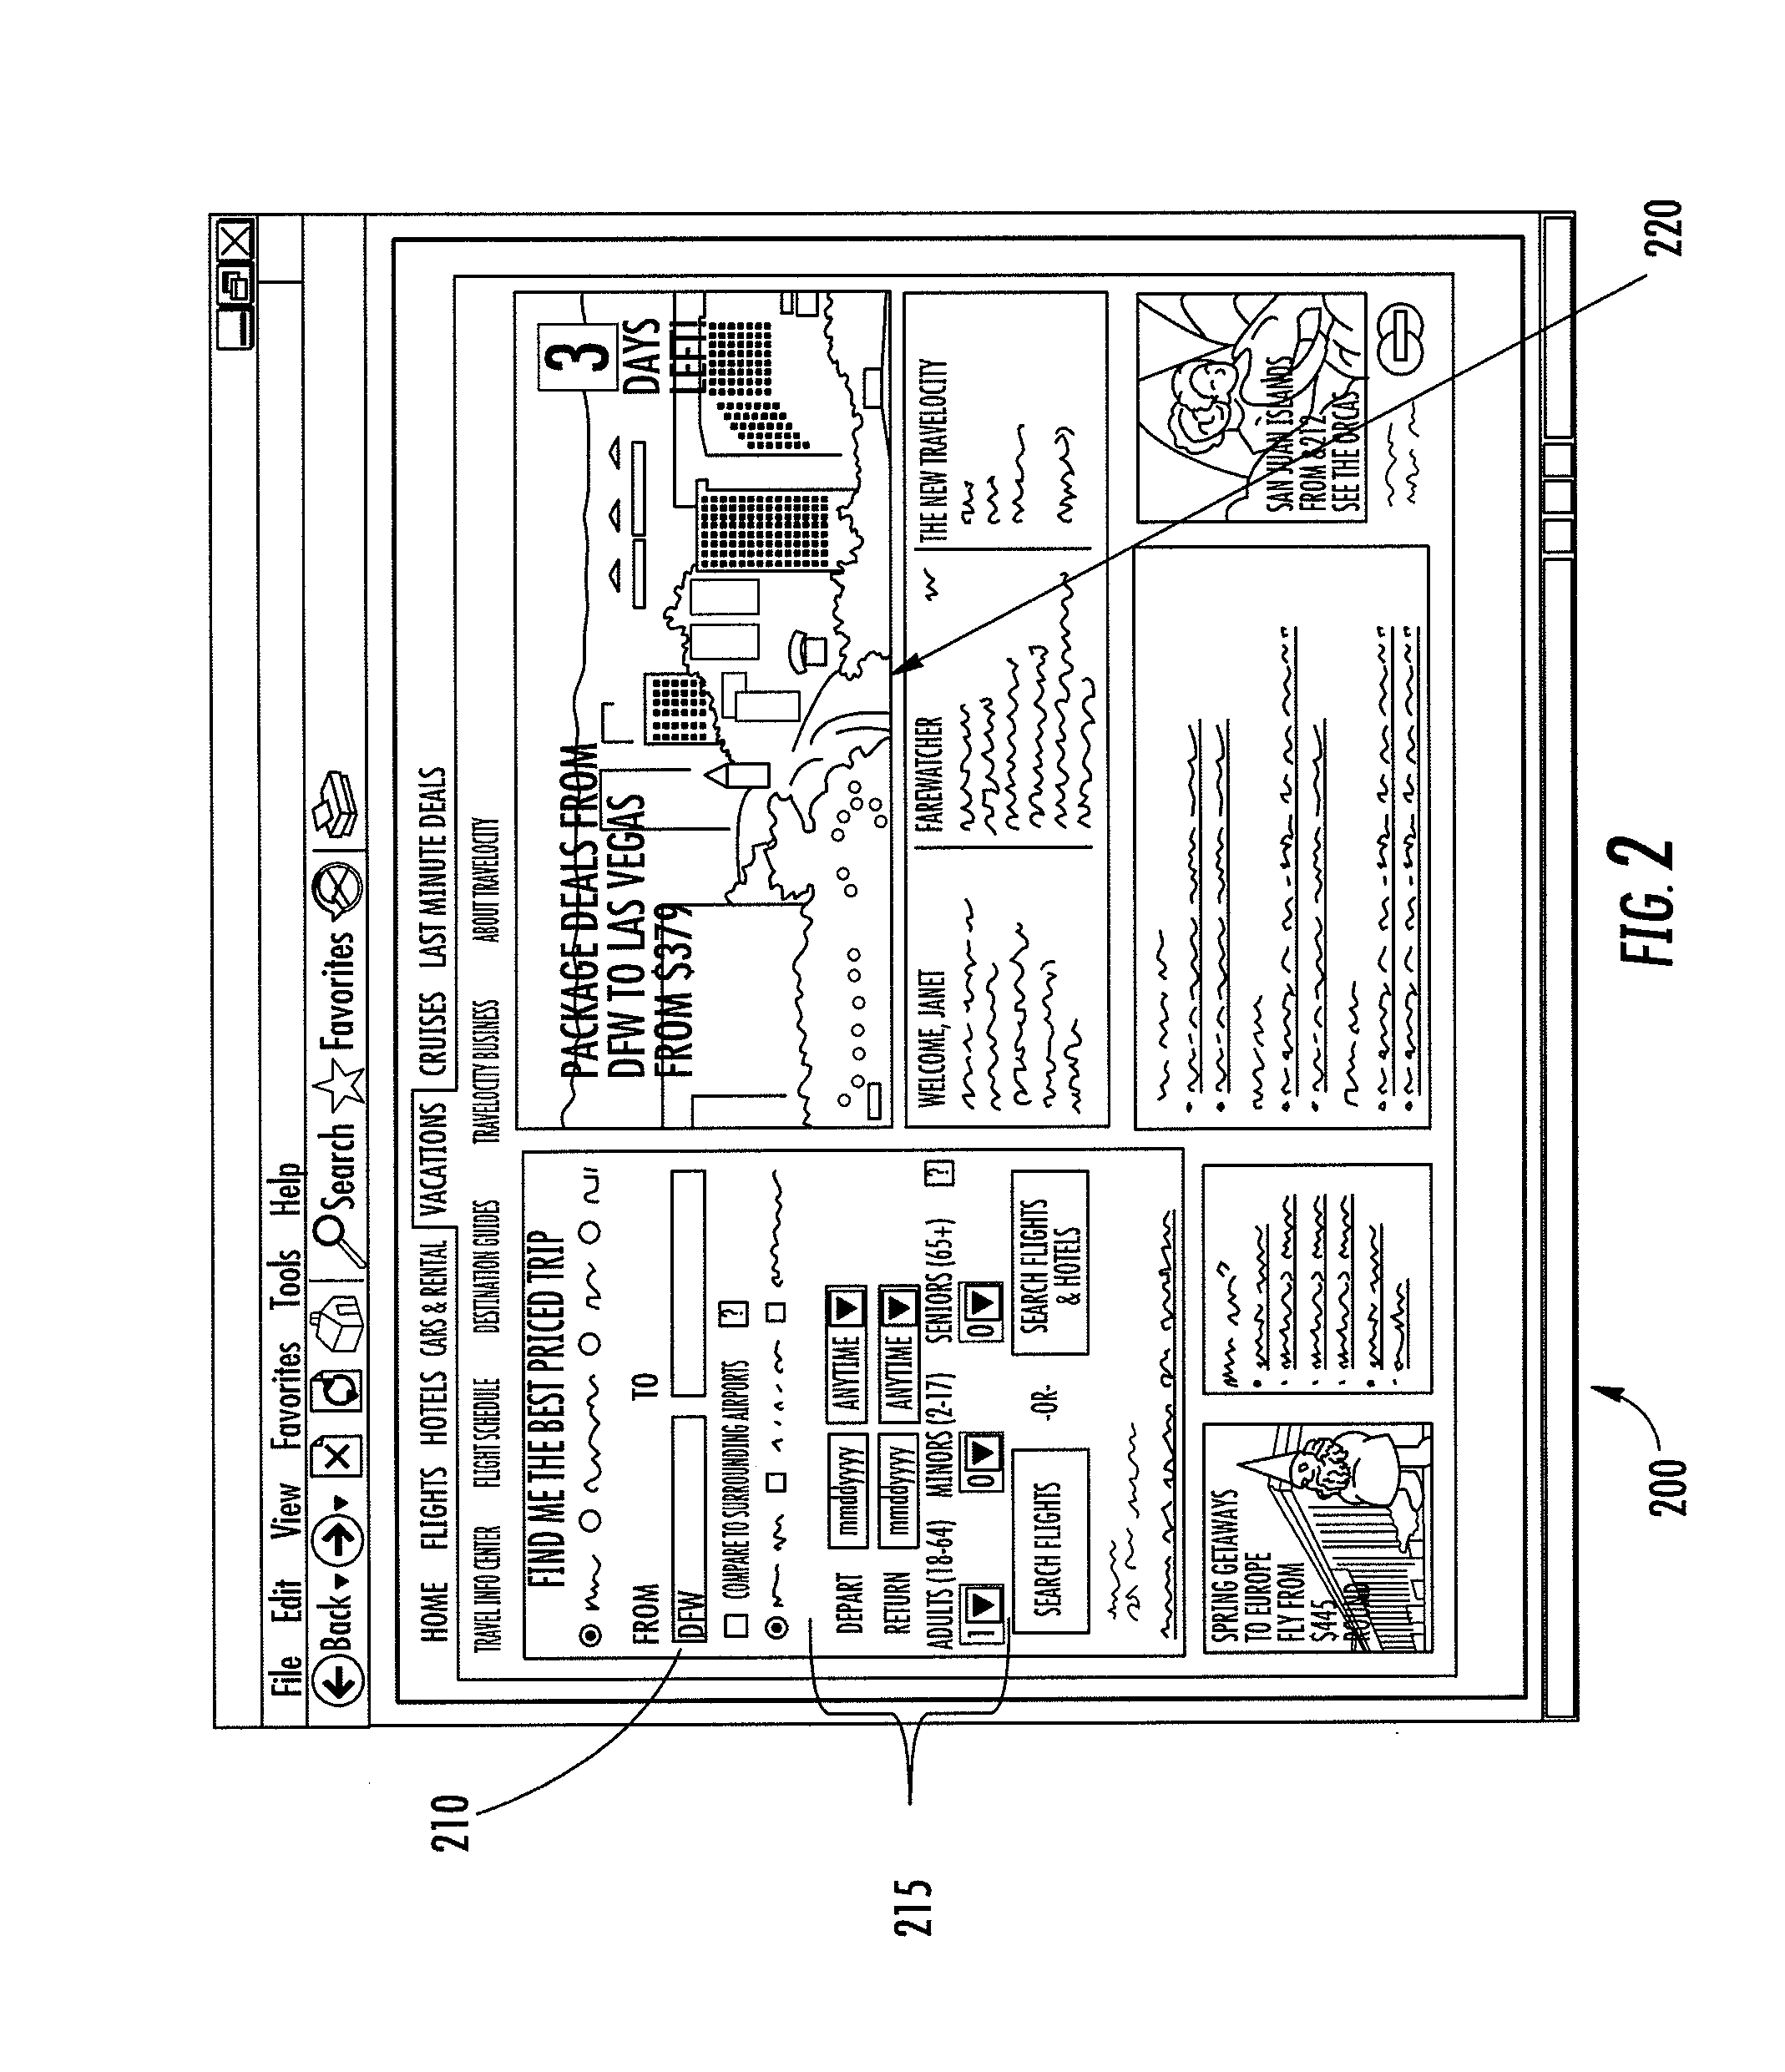 System, Method, and Computer Program Product for Assembling and Displaying a Travel Itinerary